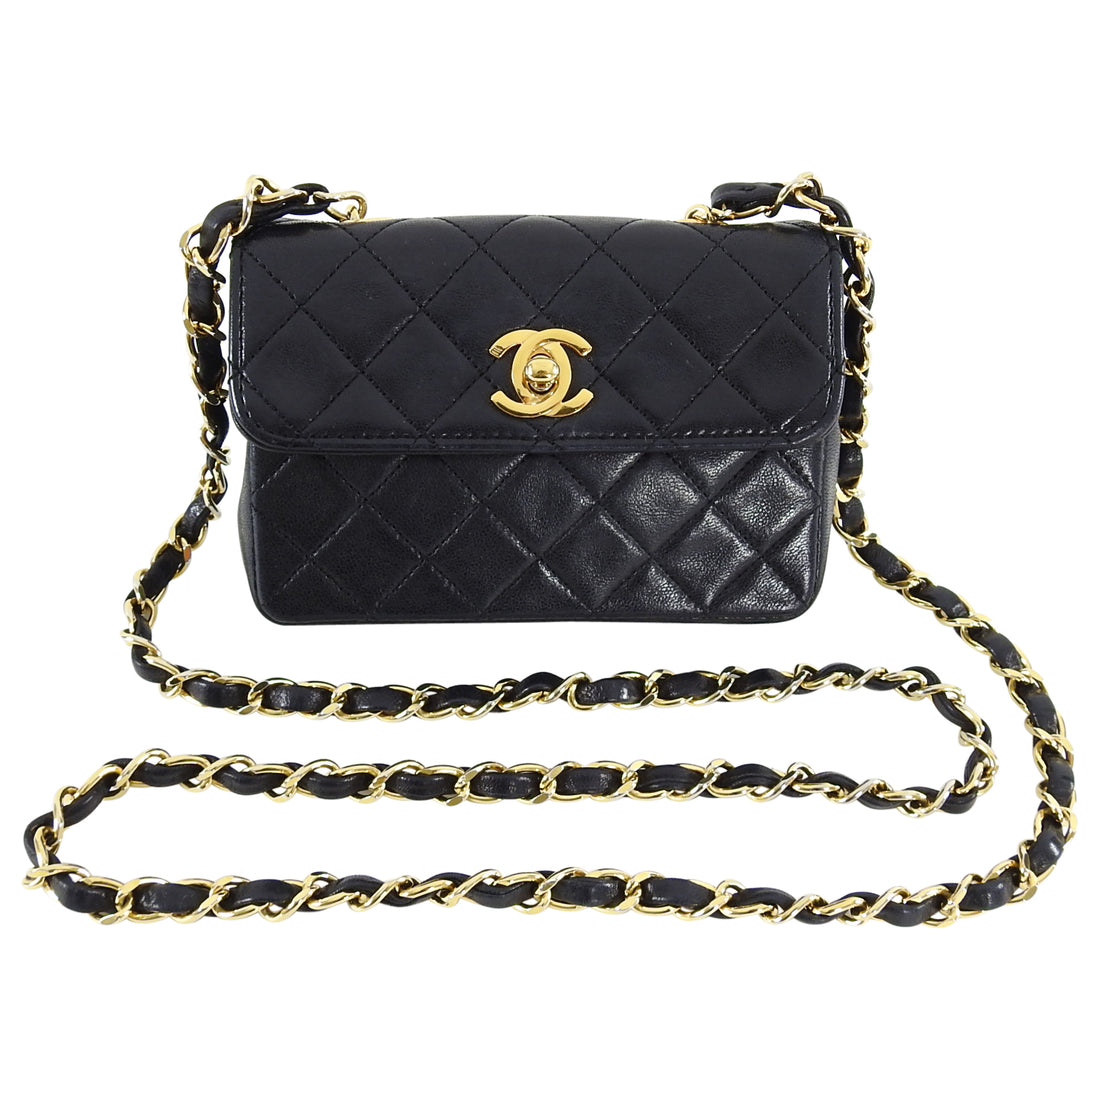 Chanel White Quilted Lambskin Rectangular Mini Classic Flap Bag  Madison  Avenue Couture